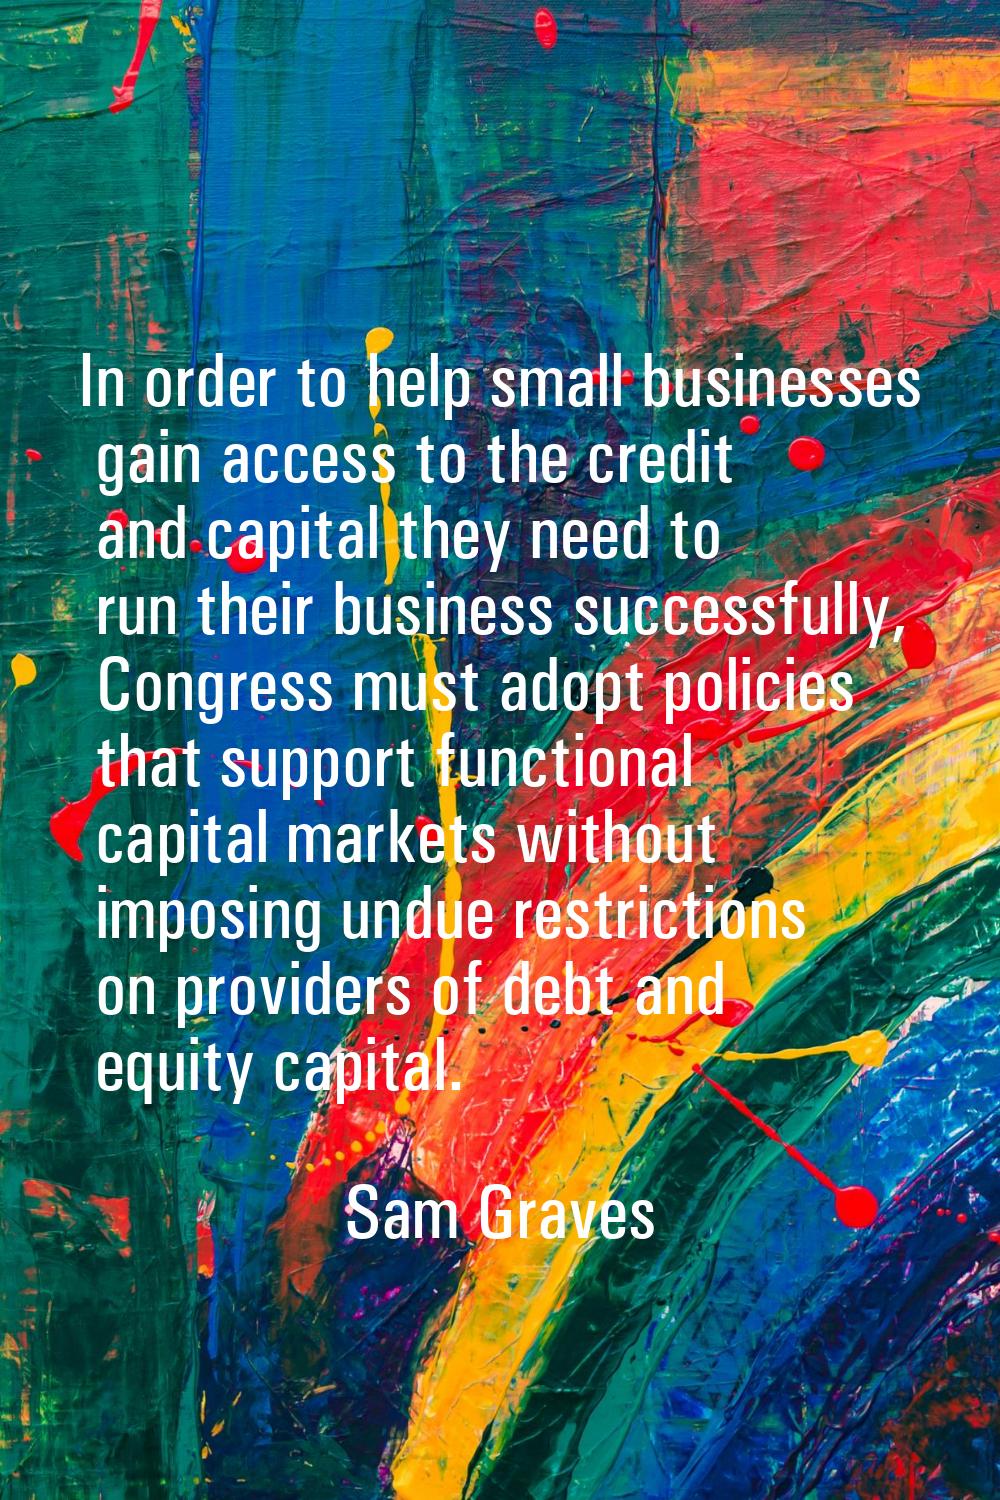 In order to help small businesses gain access to the credit and capital they need to run their busi